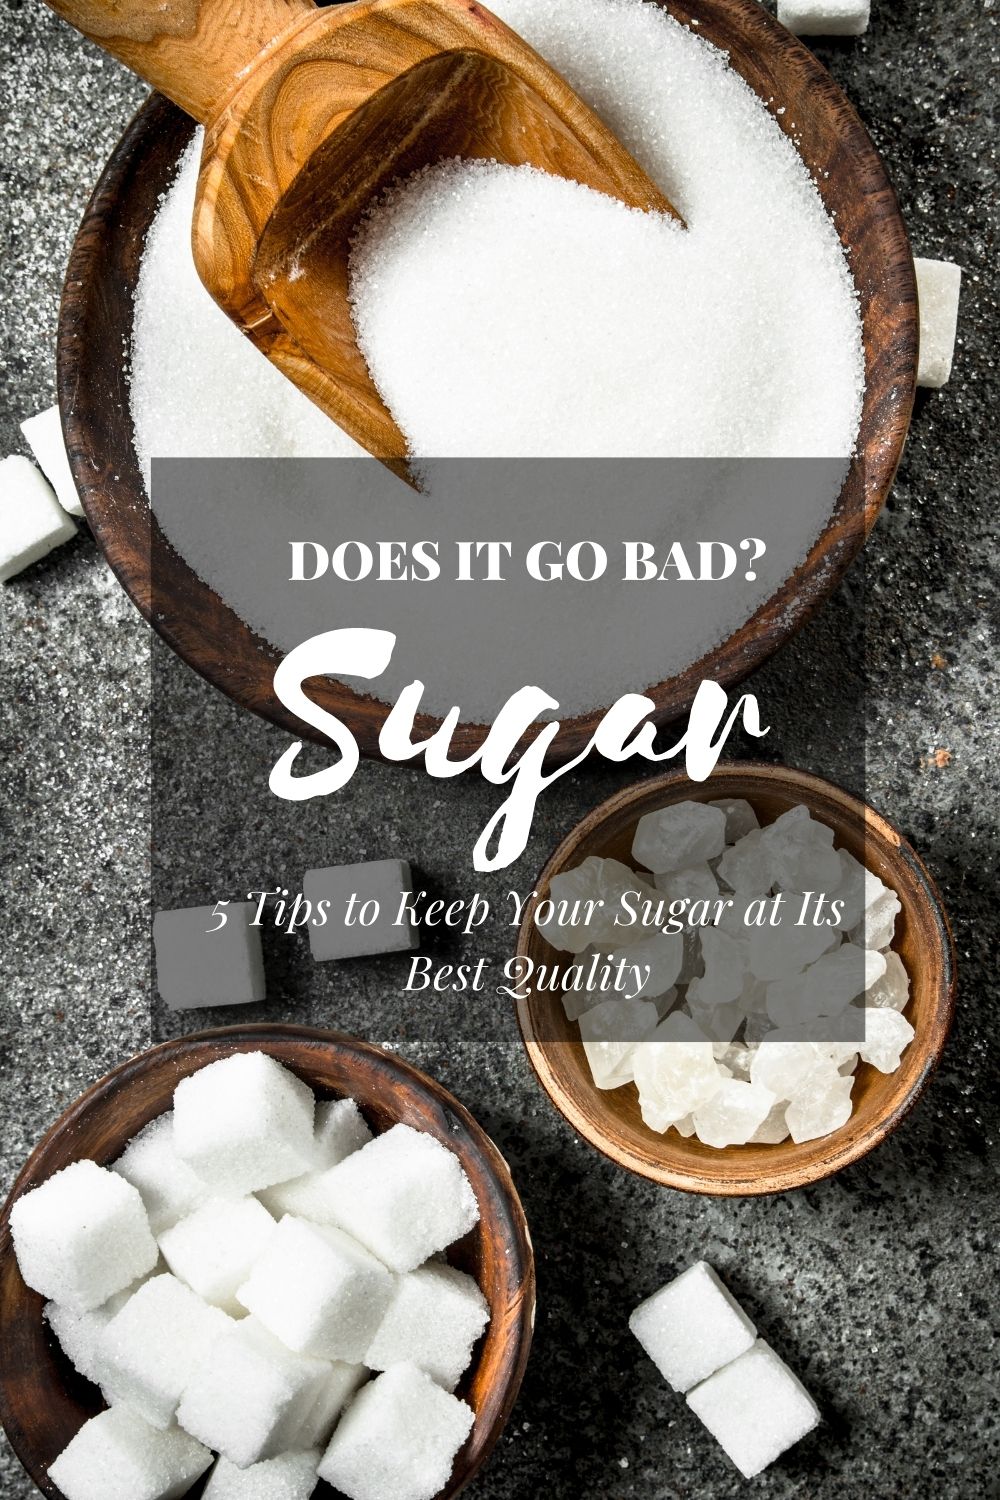 Does Sugar Go Bad? 5 Tips to Keep Your Sugar at Its Best Quality -  StreetSmart Kitchen